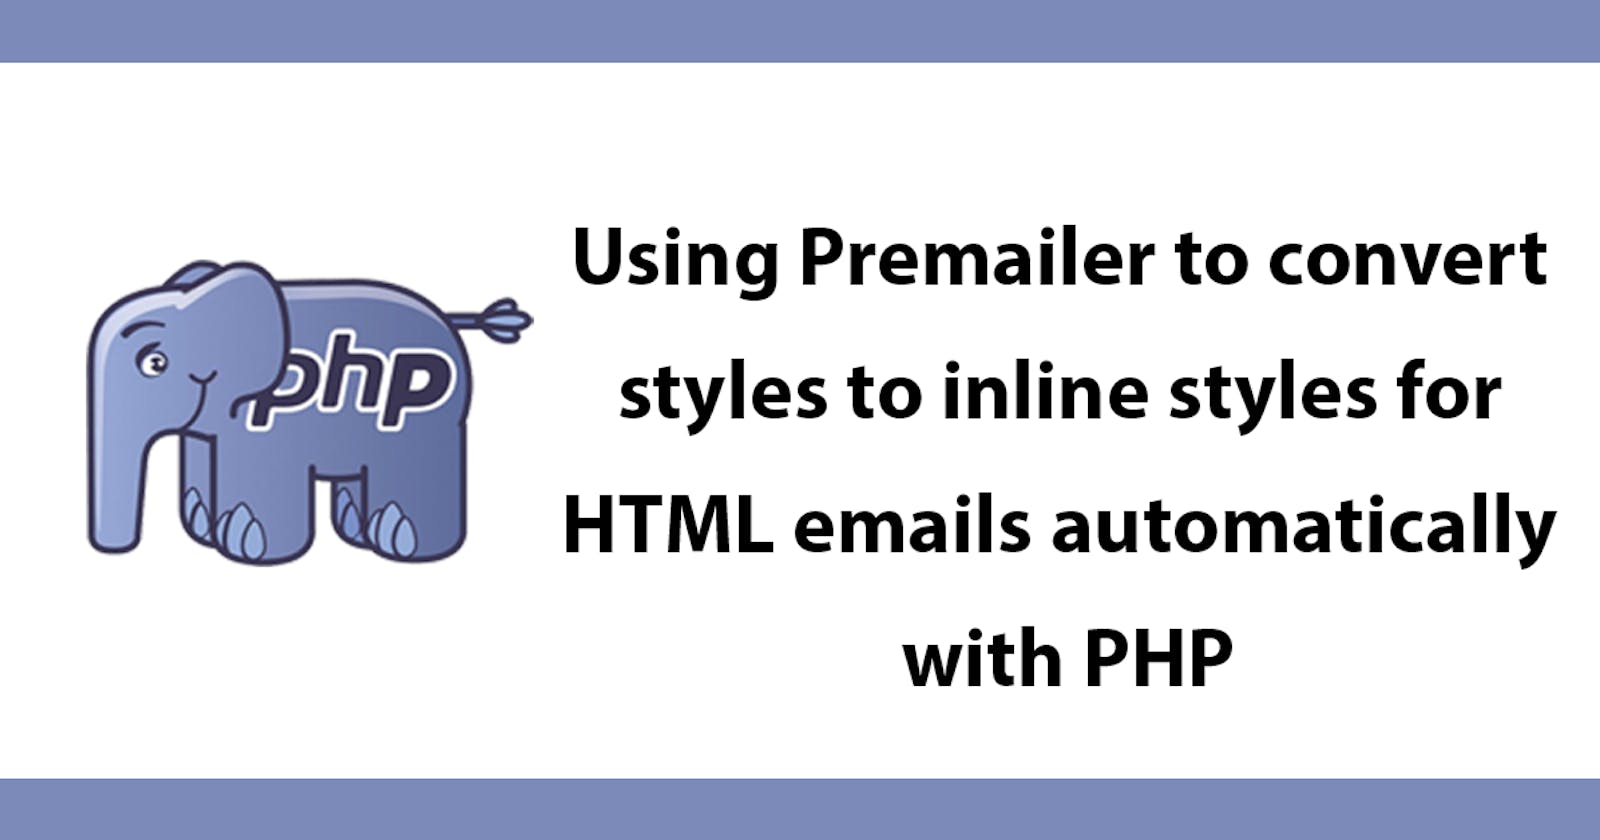 Using Premailer to convert styles to inline styles for HTML emails automatically with PHP